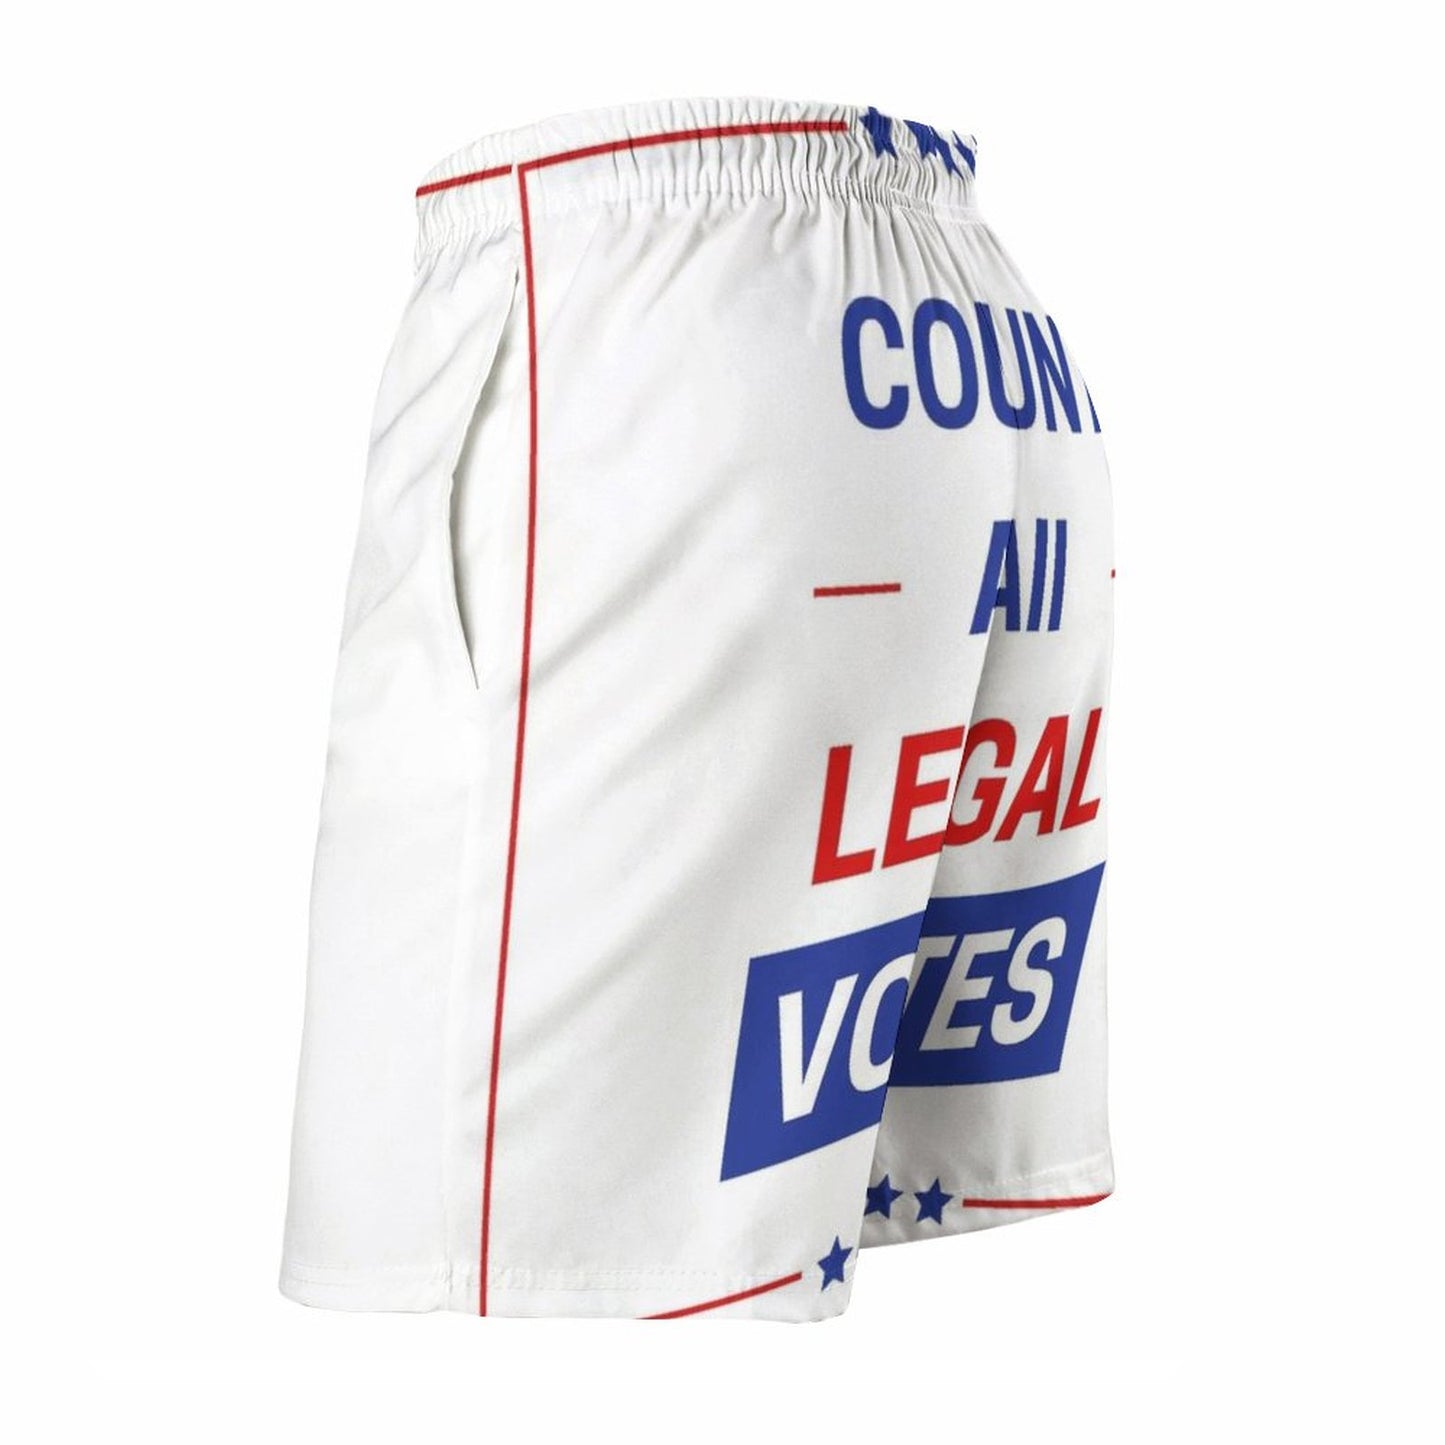 Count All Legal Votes Men's Beach Shorts l 3D Printing Loose Surf Board Shorts